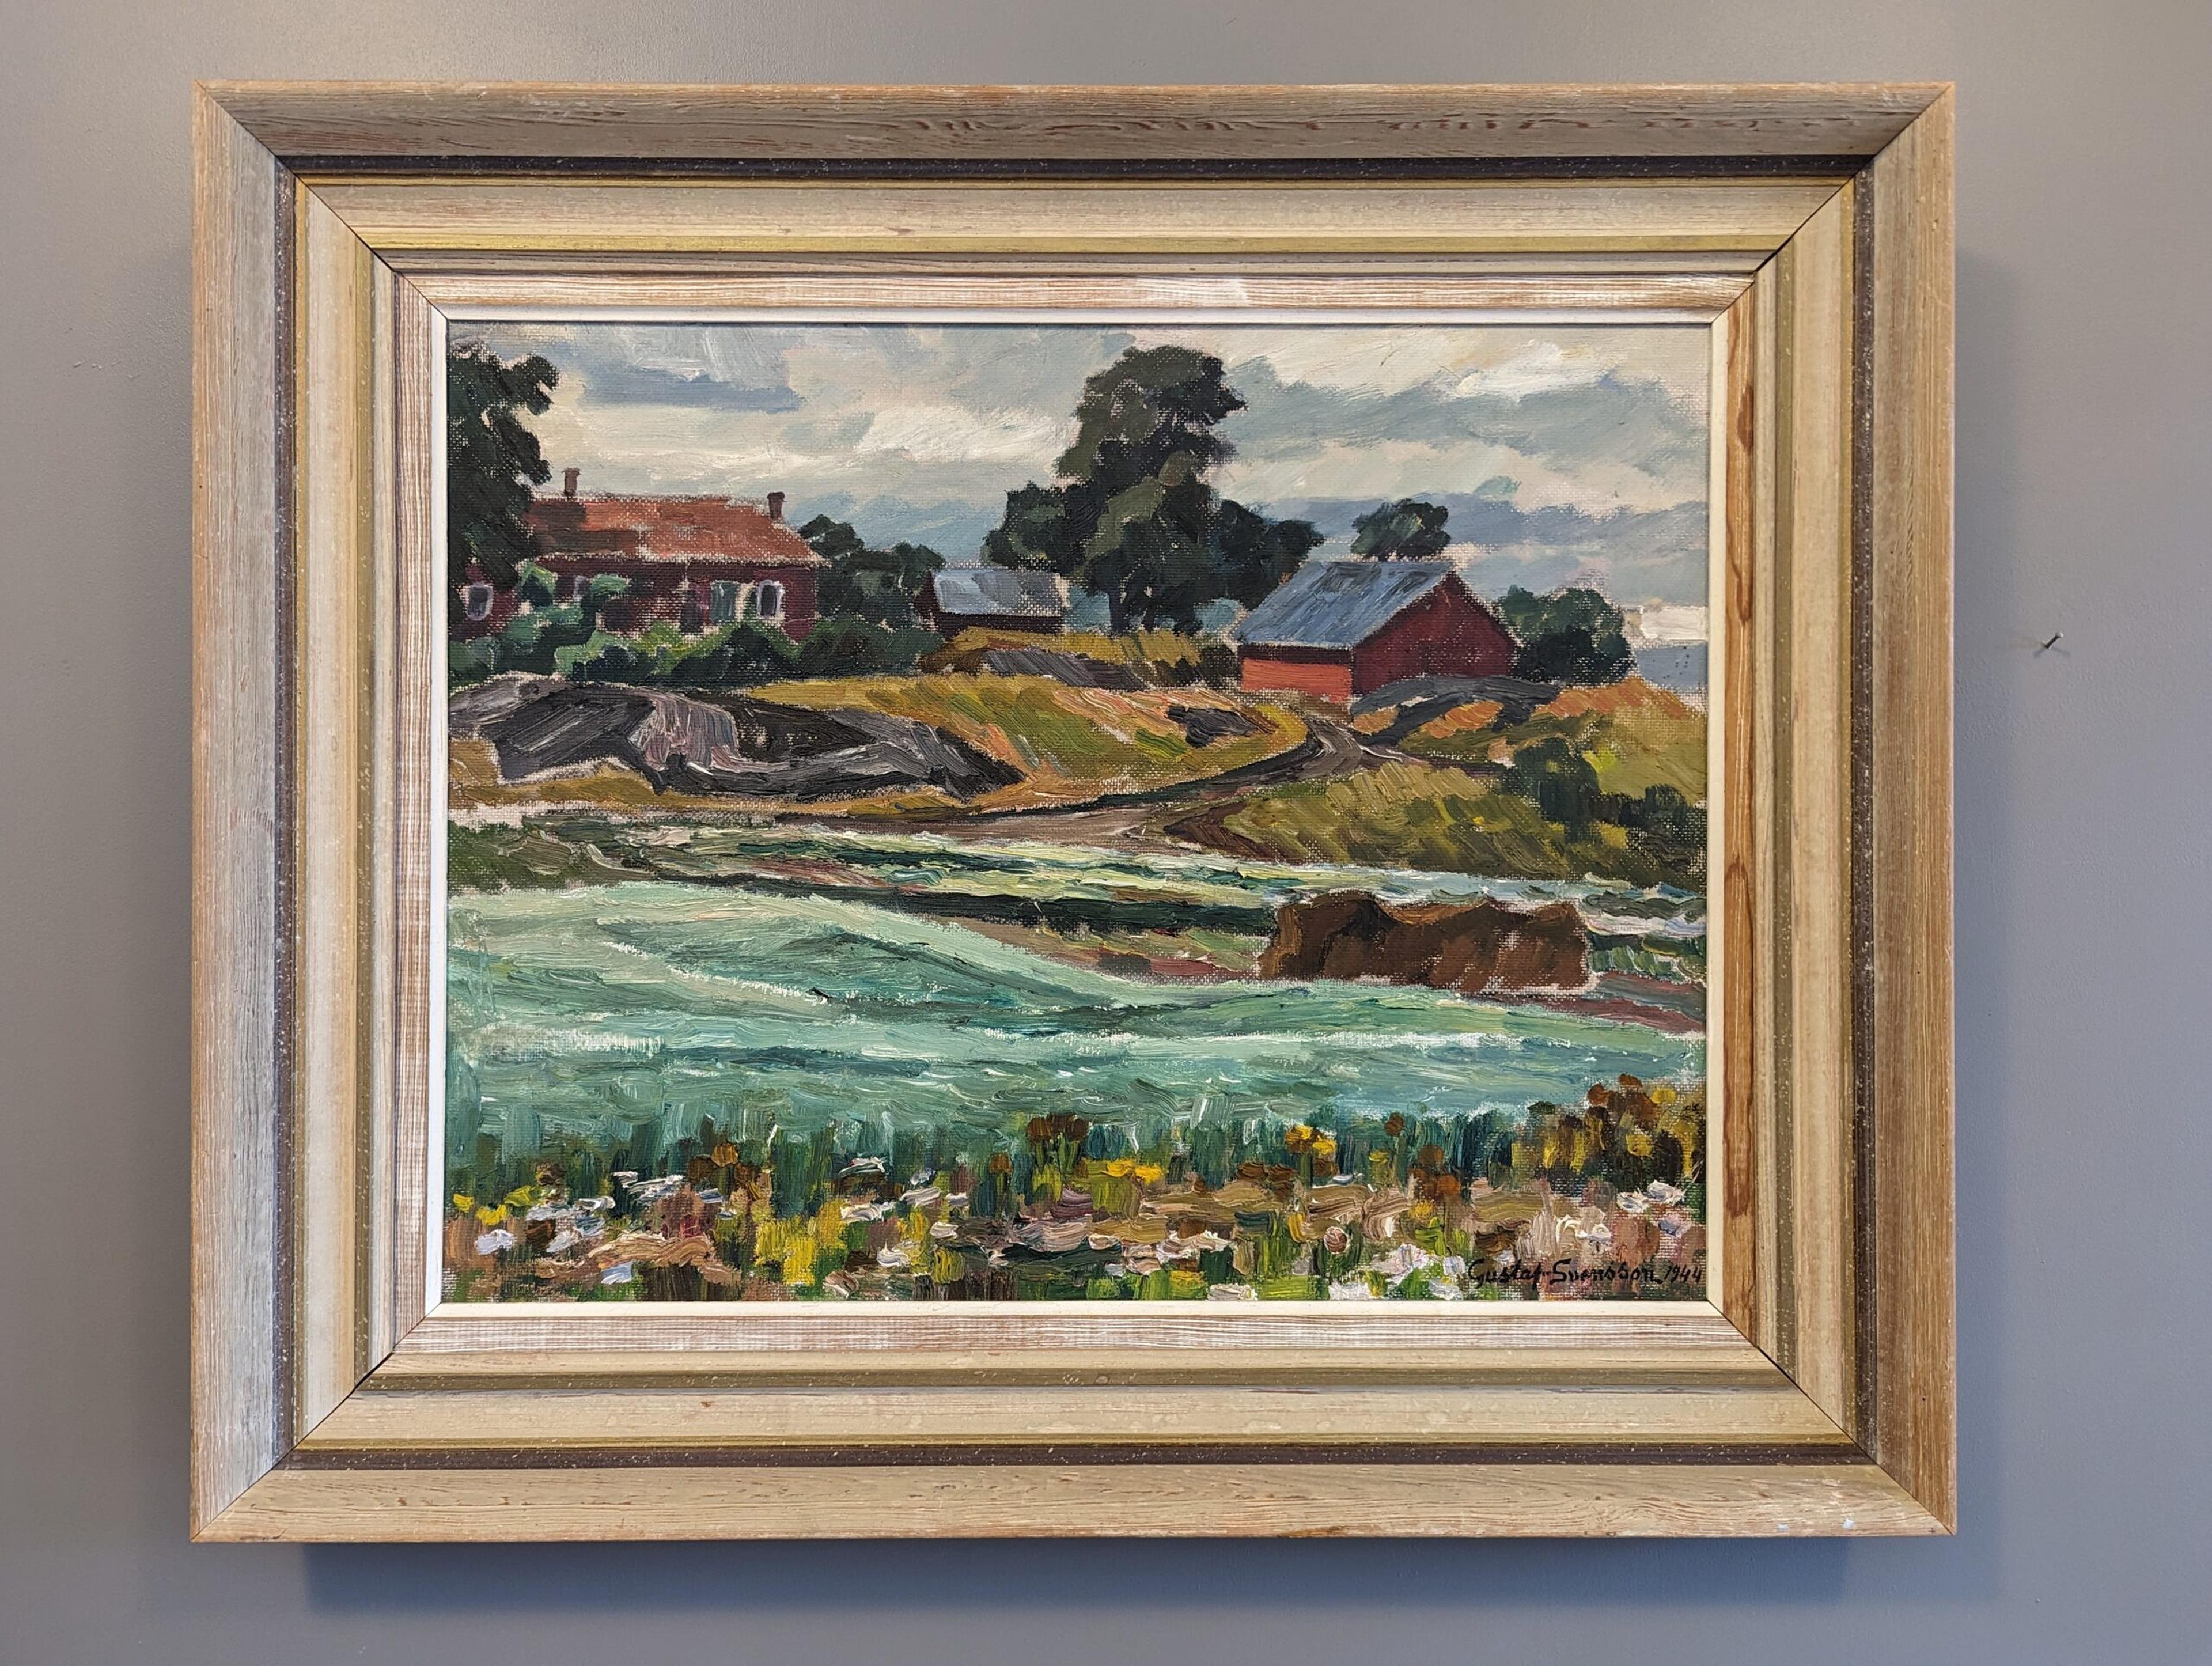 PASTURE HOUSES
Size: 56 x 67.5 cm (including frame)
Oil on Board

A richly coloured mid-century modernist landscape composition, painted in oil onto board and dated 1944.

Featuring expressionist characteristics, this composition is made of bold,